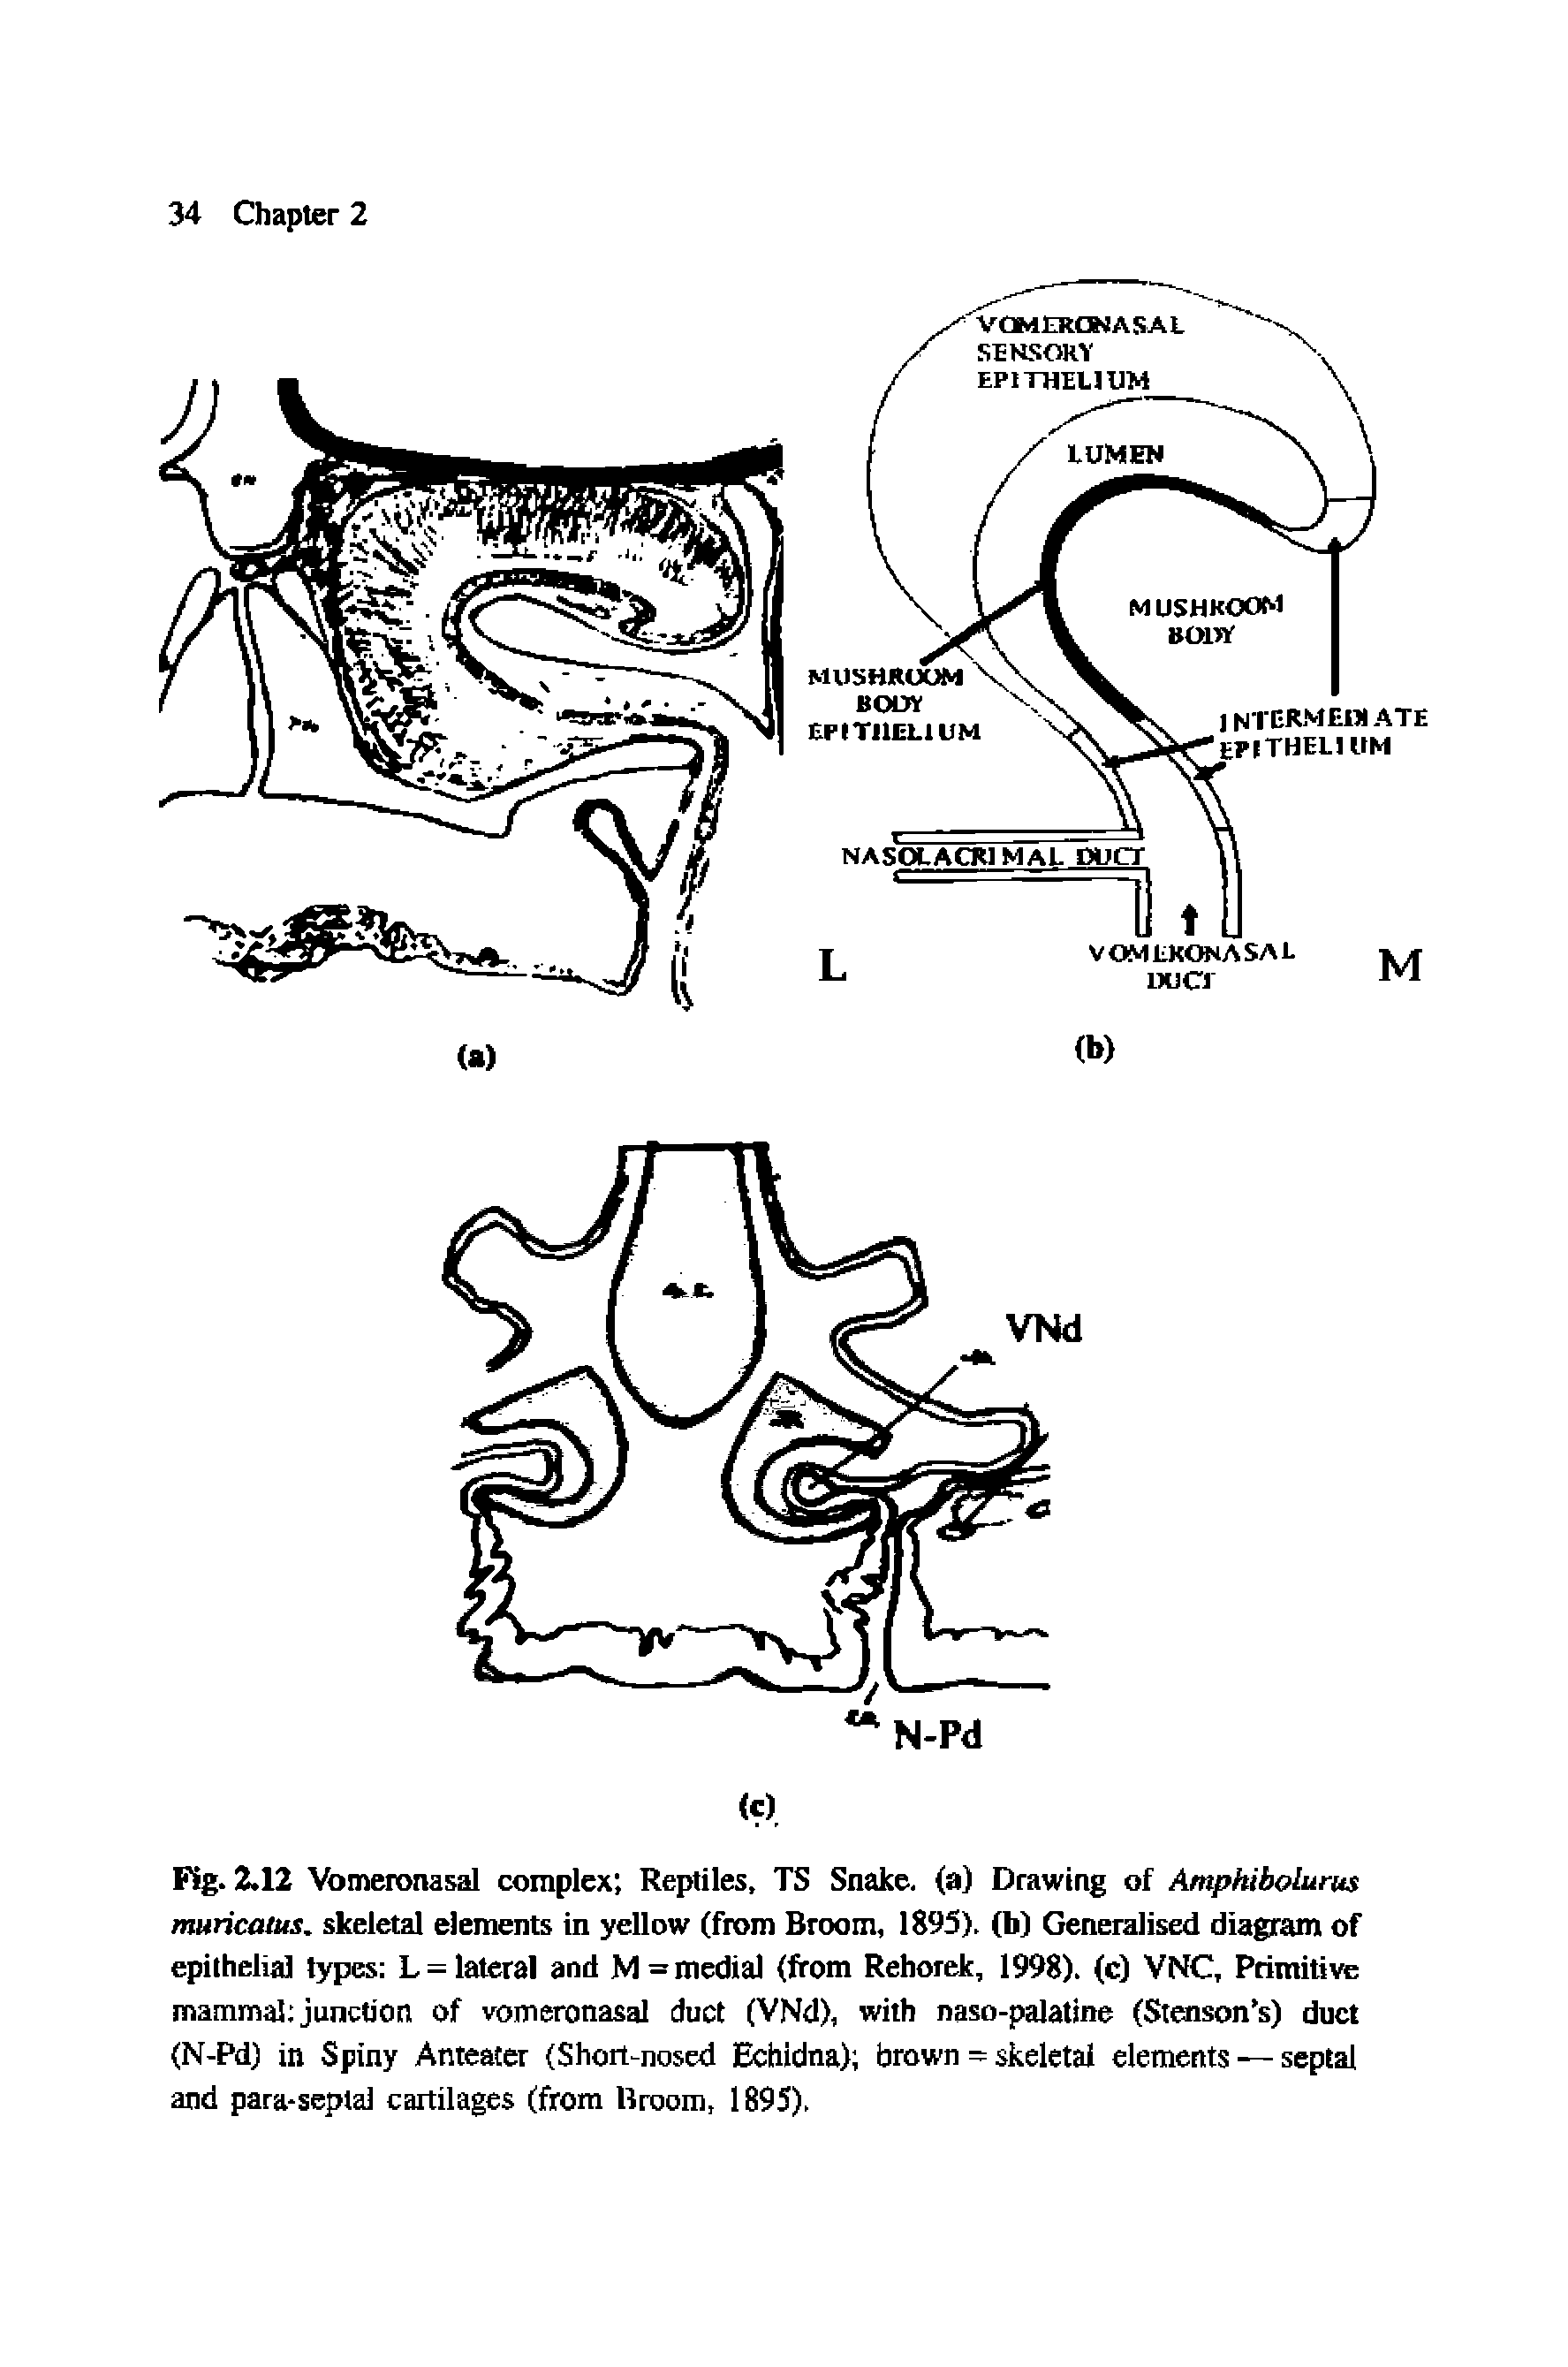 Fig. 2.12 Vomeronasal complex Reptiles, TS Snake, (a) Drawing of Amphibolurus muricatus. skeletal elements in yellow (from Broom, 1895). (b) Generalised diagram of epithelial types L = lateral and M= medial (from Rehorek, 1998). (c) VNC, Primitive mammal junction of vomeronasal duct (VNd), with naso-palatine (Stenson s) duct (N-Pd) in Spiny Anteater (Short-nosed Echidna) brown = skeletal elements — septal and para-septal cartilages (from Broom, 1895).